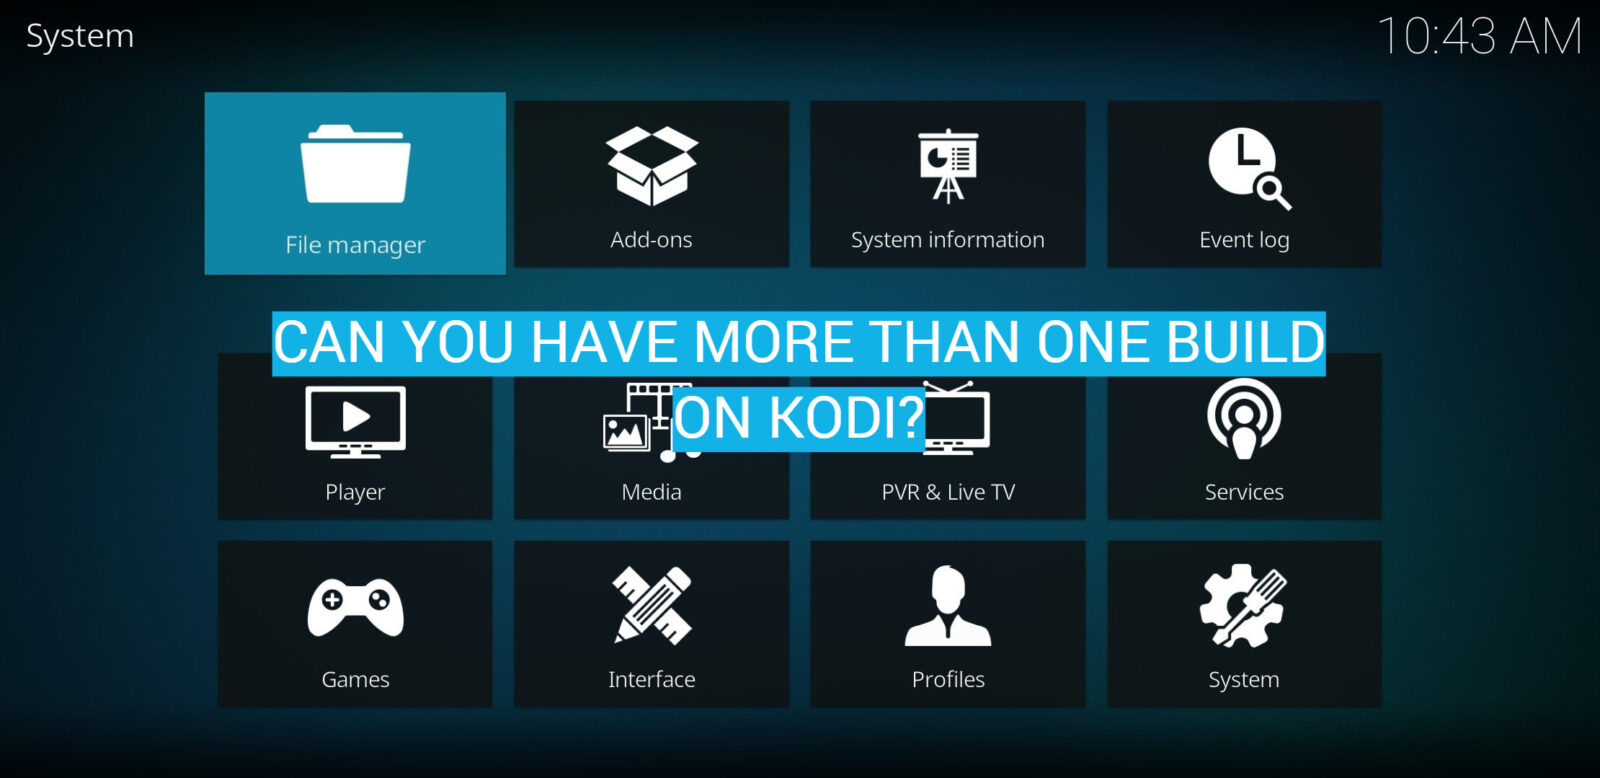 Can You Have More Than One Build on Kodi?